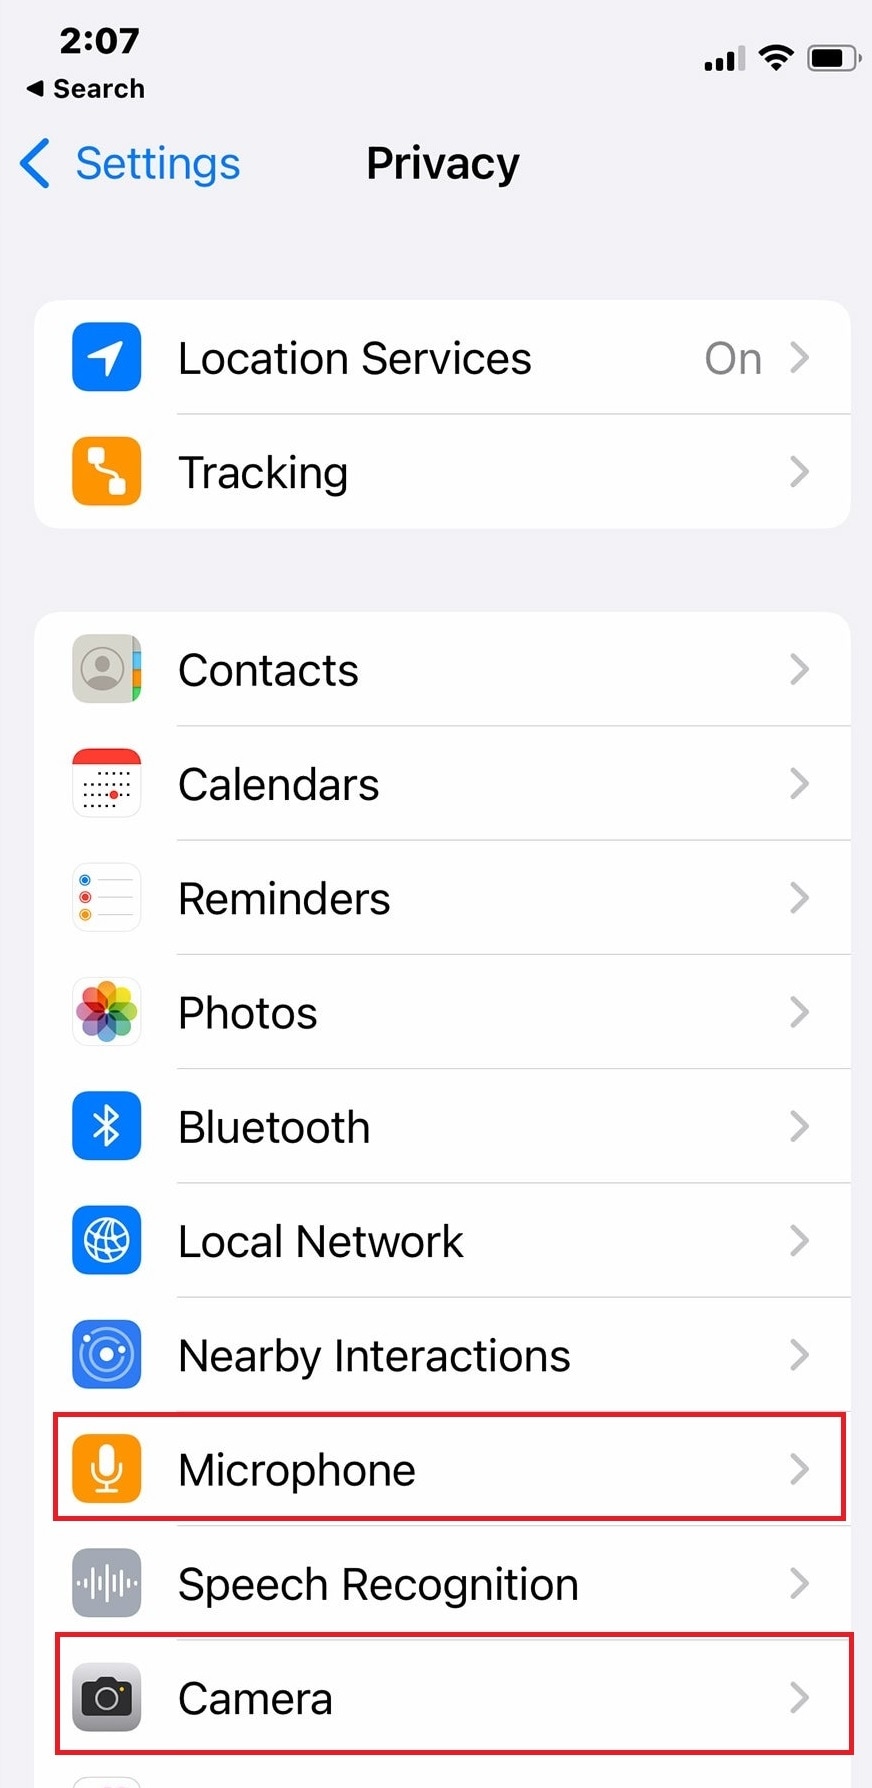 iphone privacy settings interface